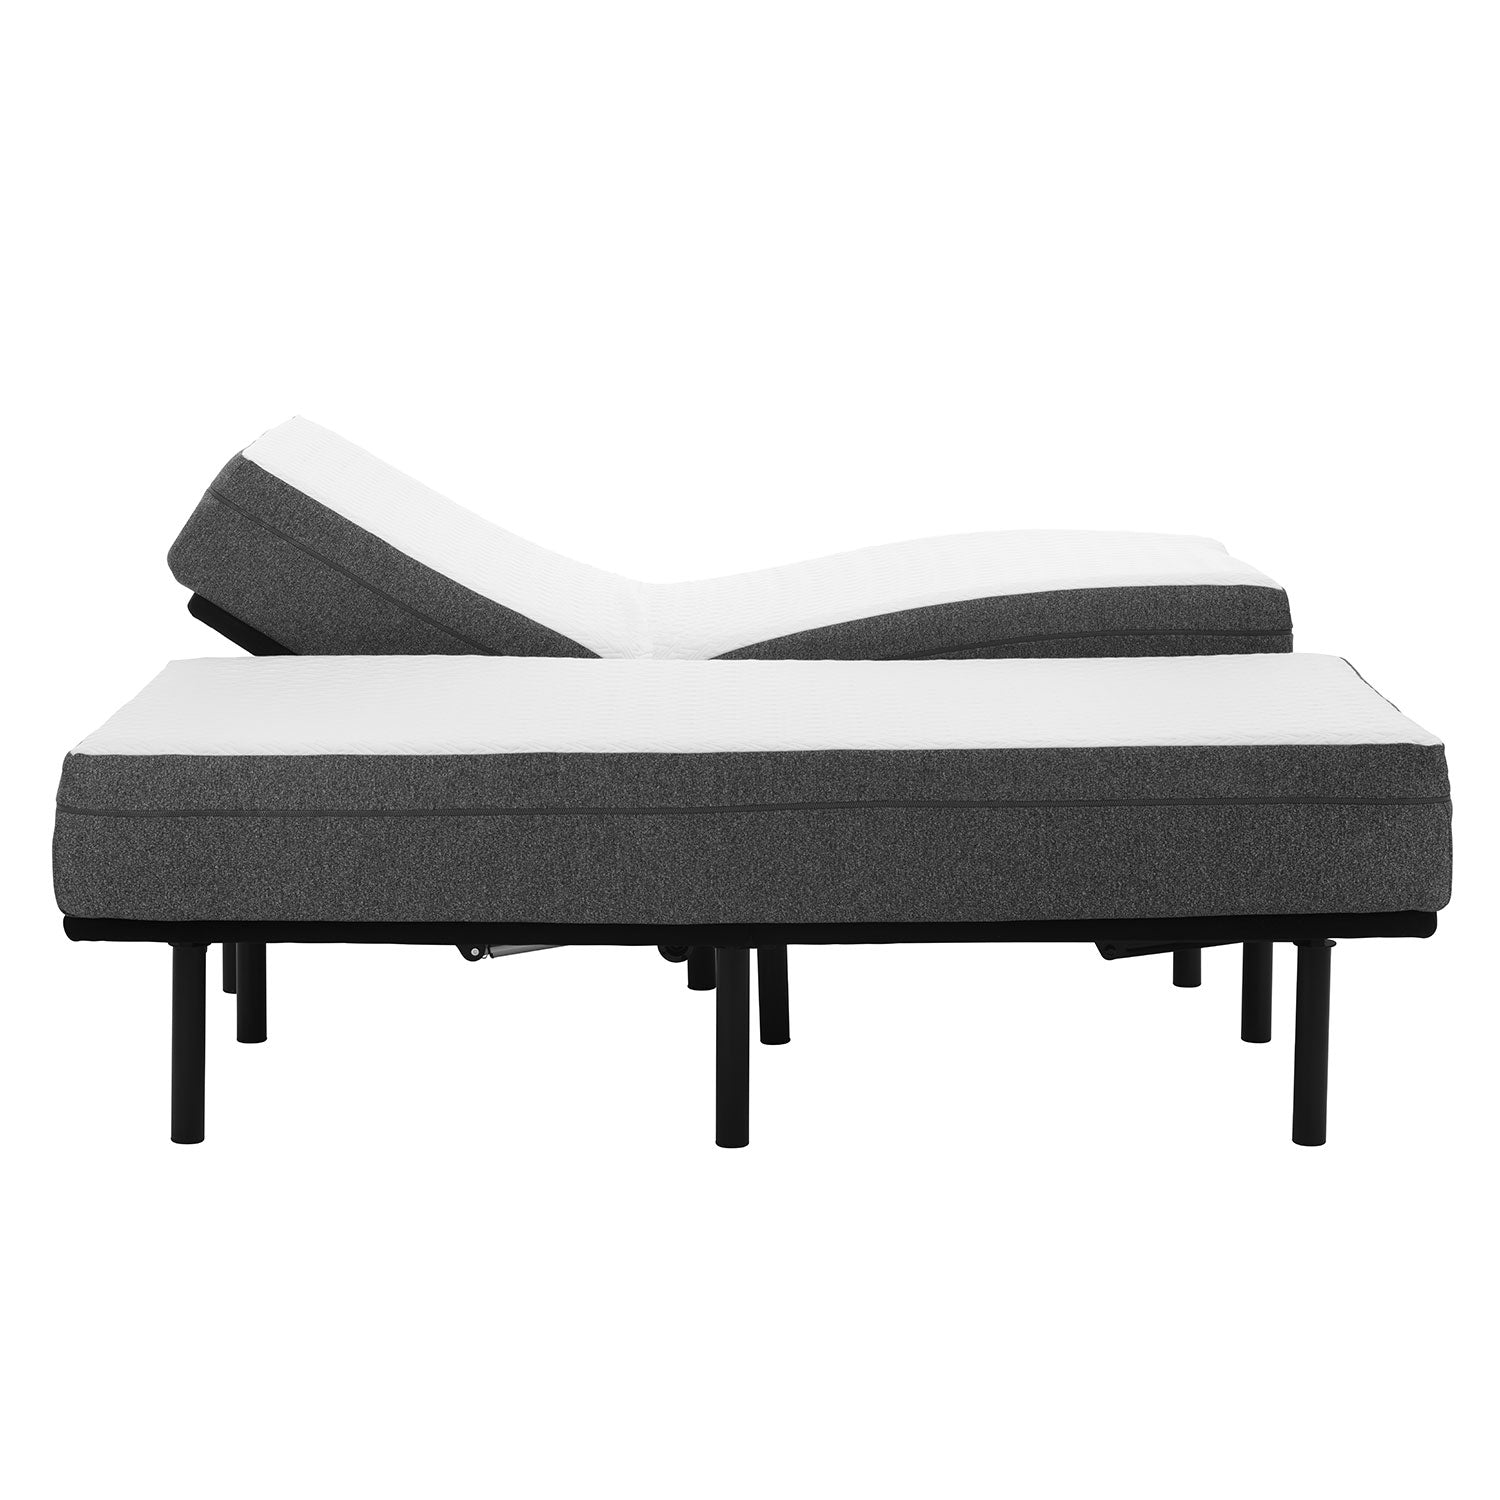 Adjustable Bed Frame and 10" Cool Gel Infused Medium Firm Memory Foam Mattress - BlissfulNights.com